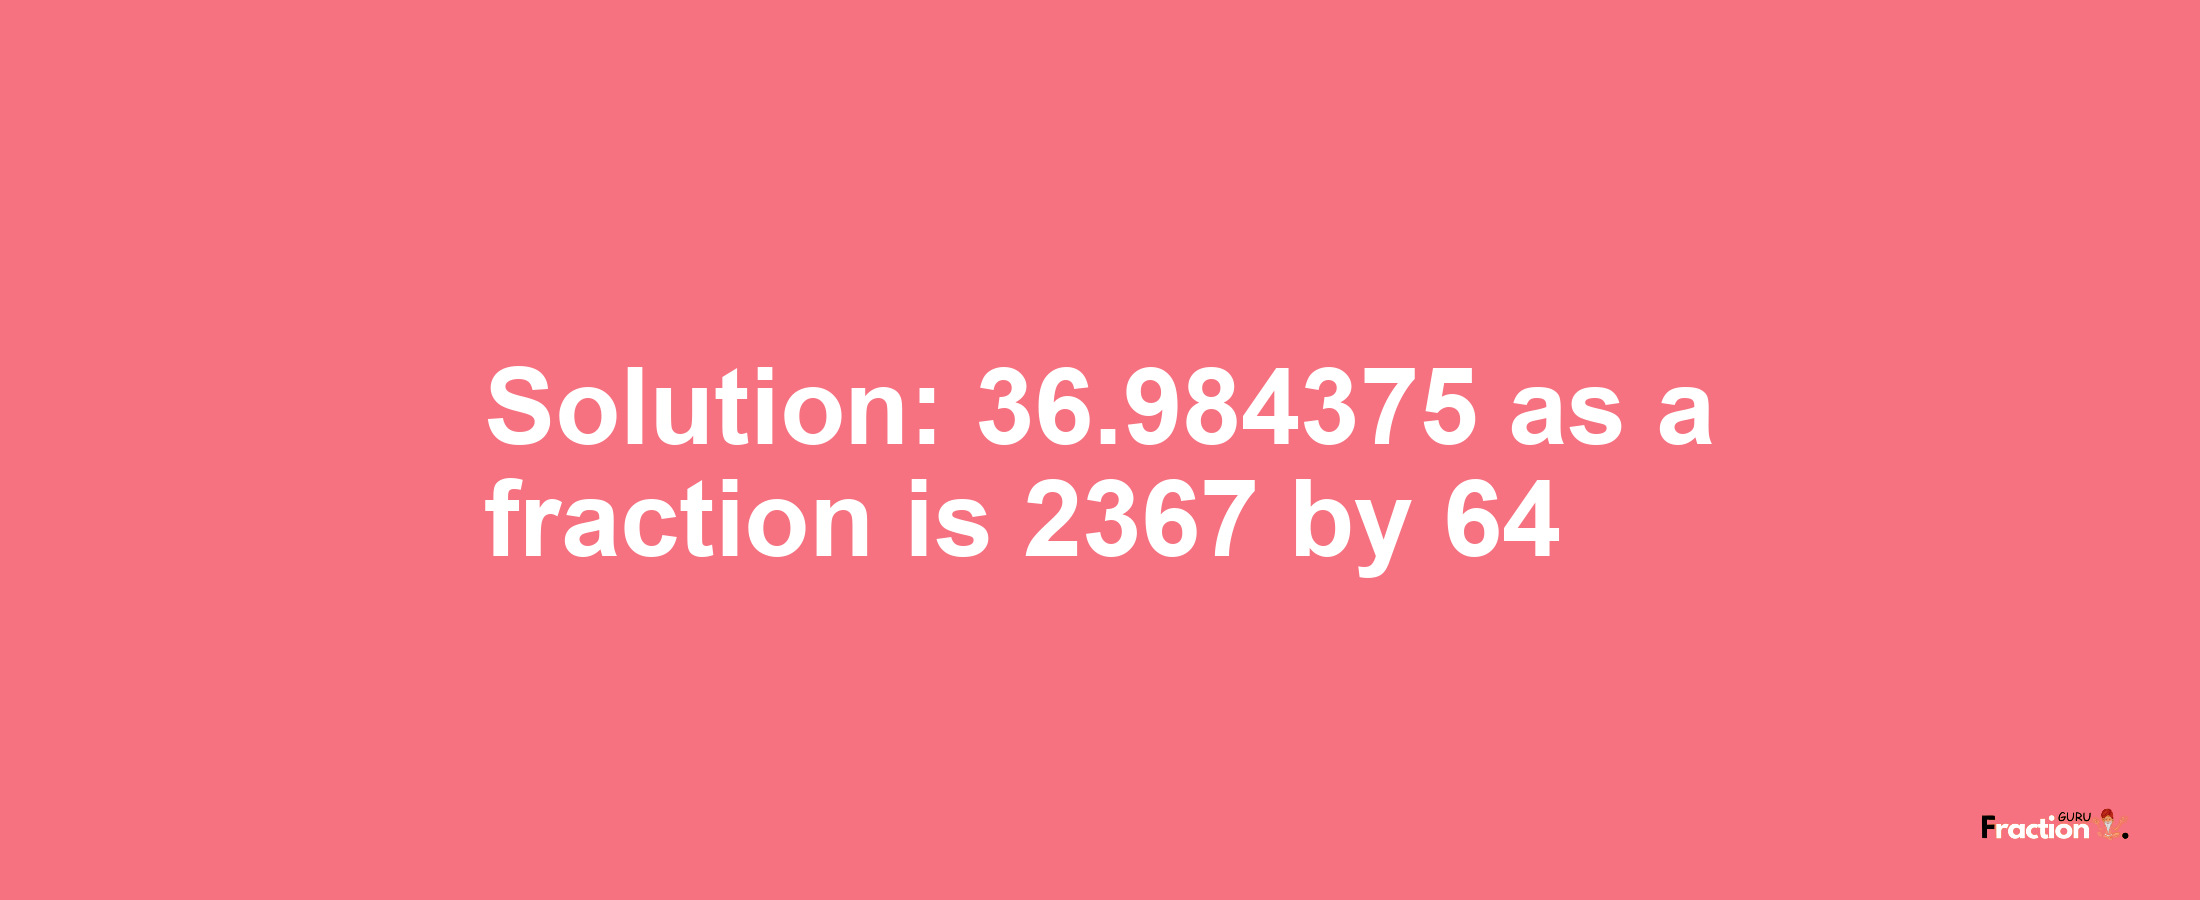 Solution:36.984375 as a fraction is 2367/64